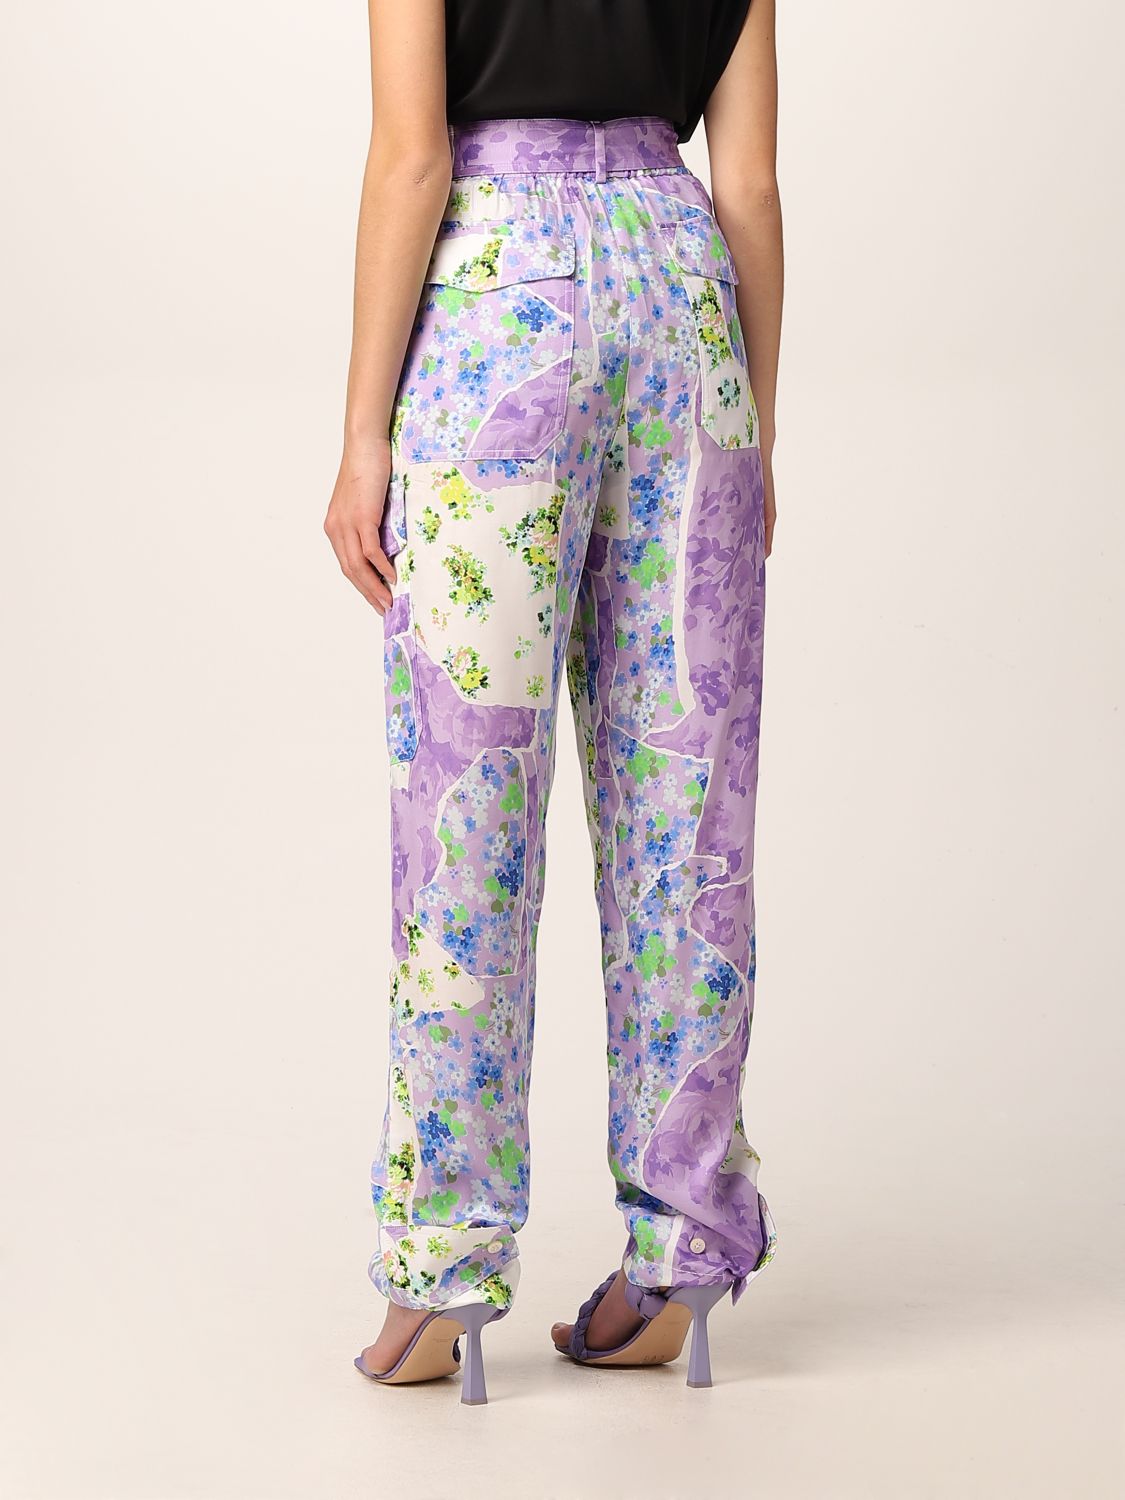 Msgm high-waisted pants with graphic pattern